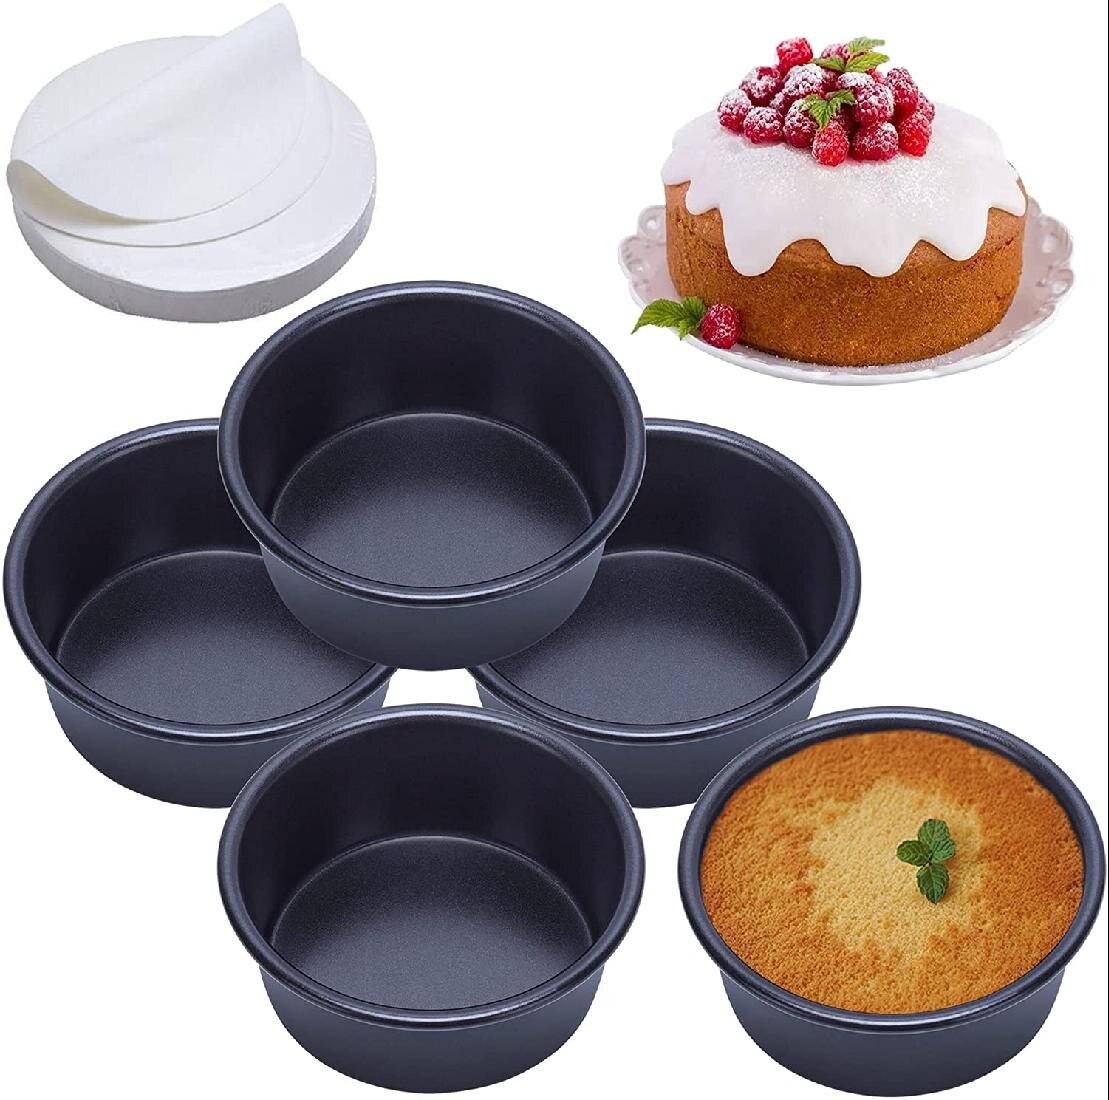 4 Pcs Round Cake Baking Pan Stainless Steel Healthy & Easy Clean Mini Cake Pans with Silicone Spatula & Silicone Brush & Measuring Spoons & Egg Separator TeamFar 4 Inch Cake Pan Set 